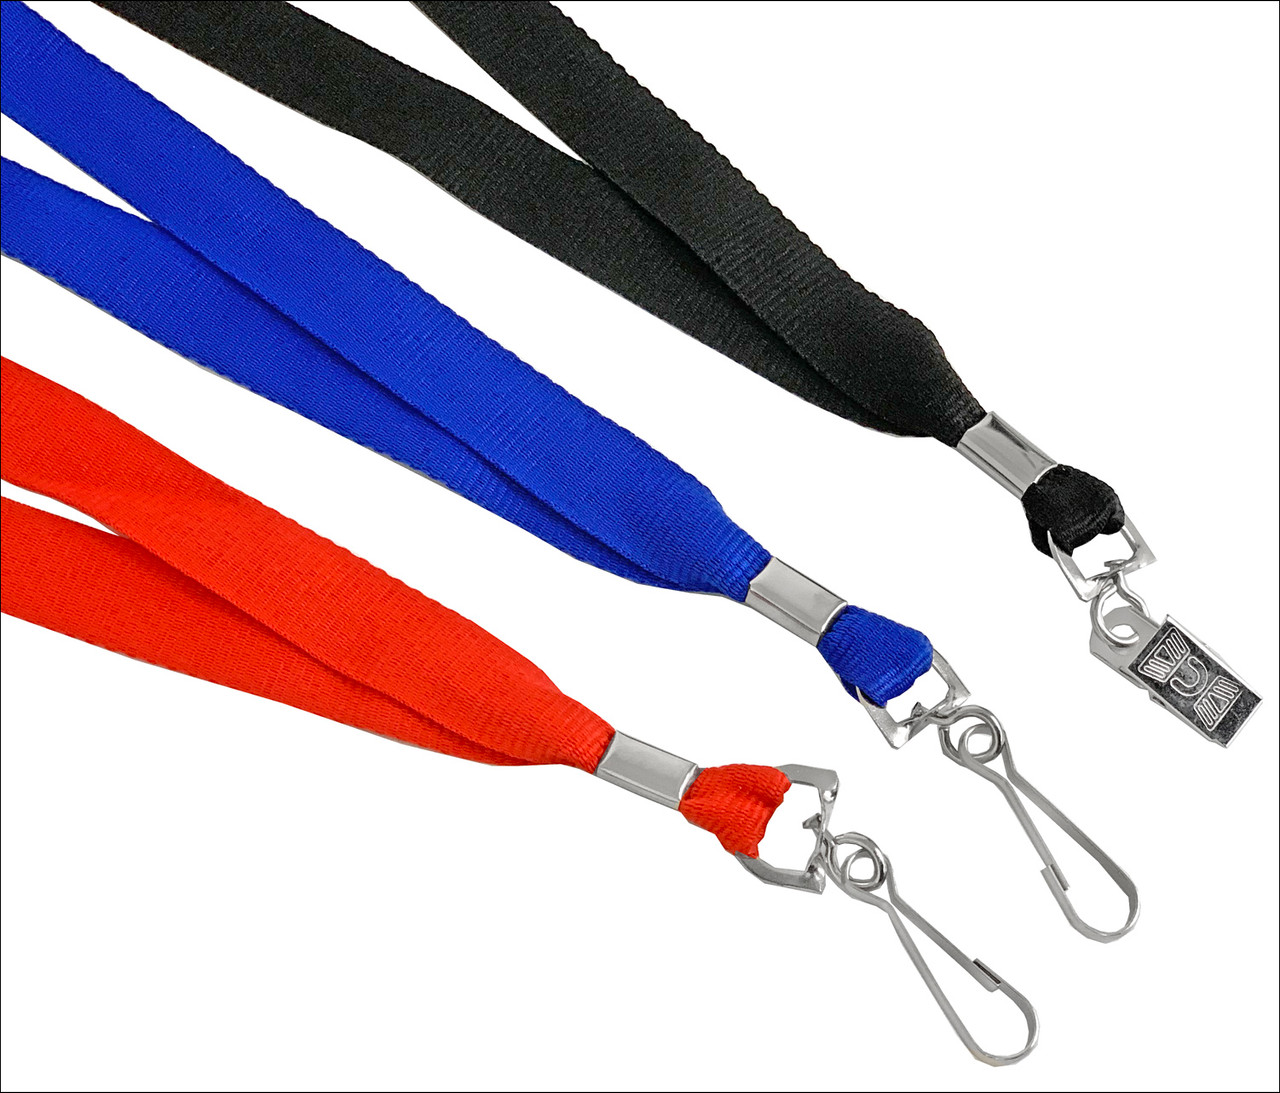 Our Bulldog Clip Lanyard In Stock For Overnight Delivery, Order Now